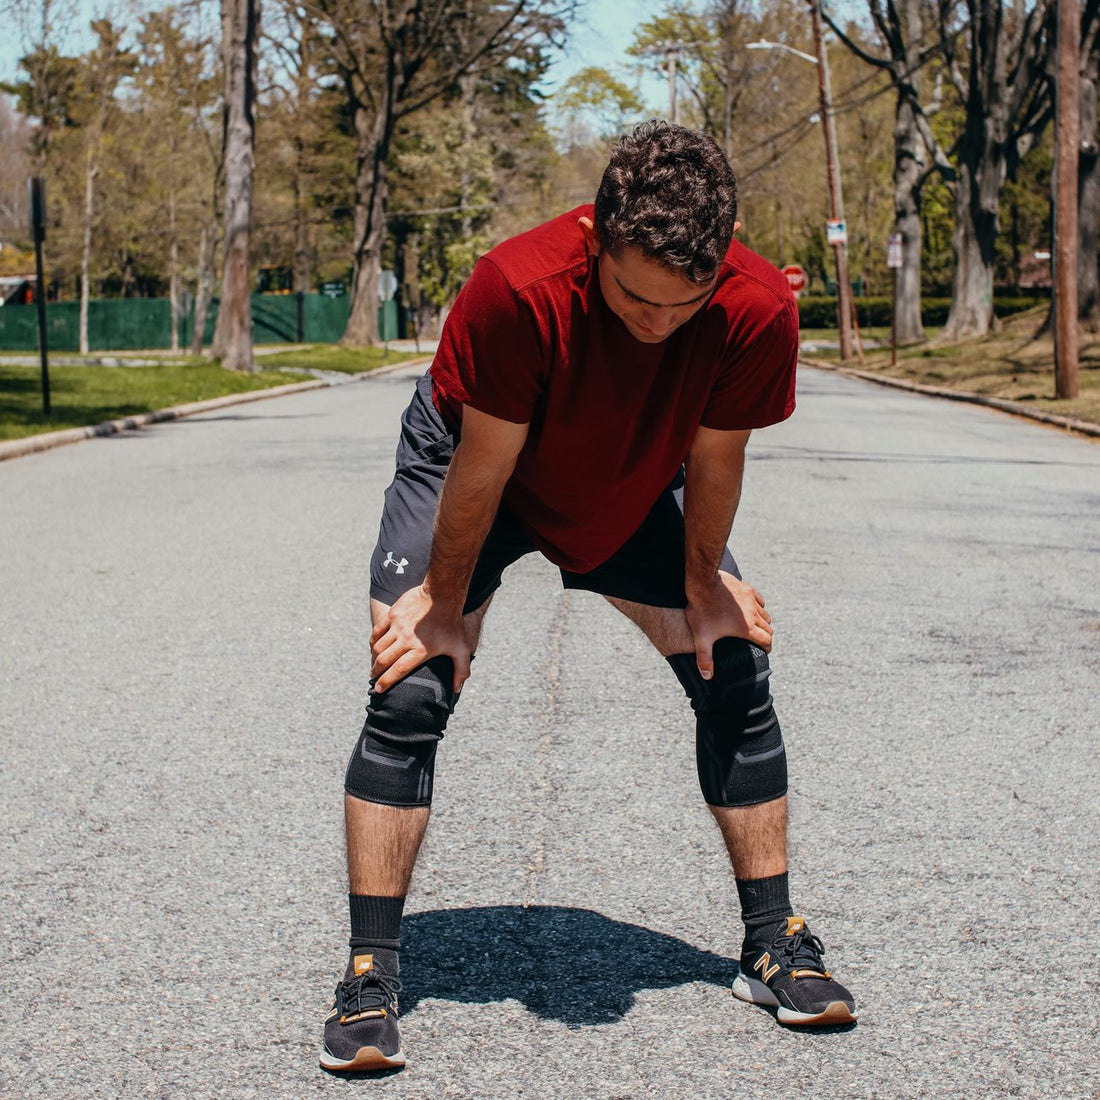 The Top 5 Things to Consider When Buying Knee Sleeves